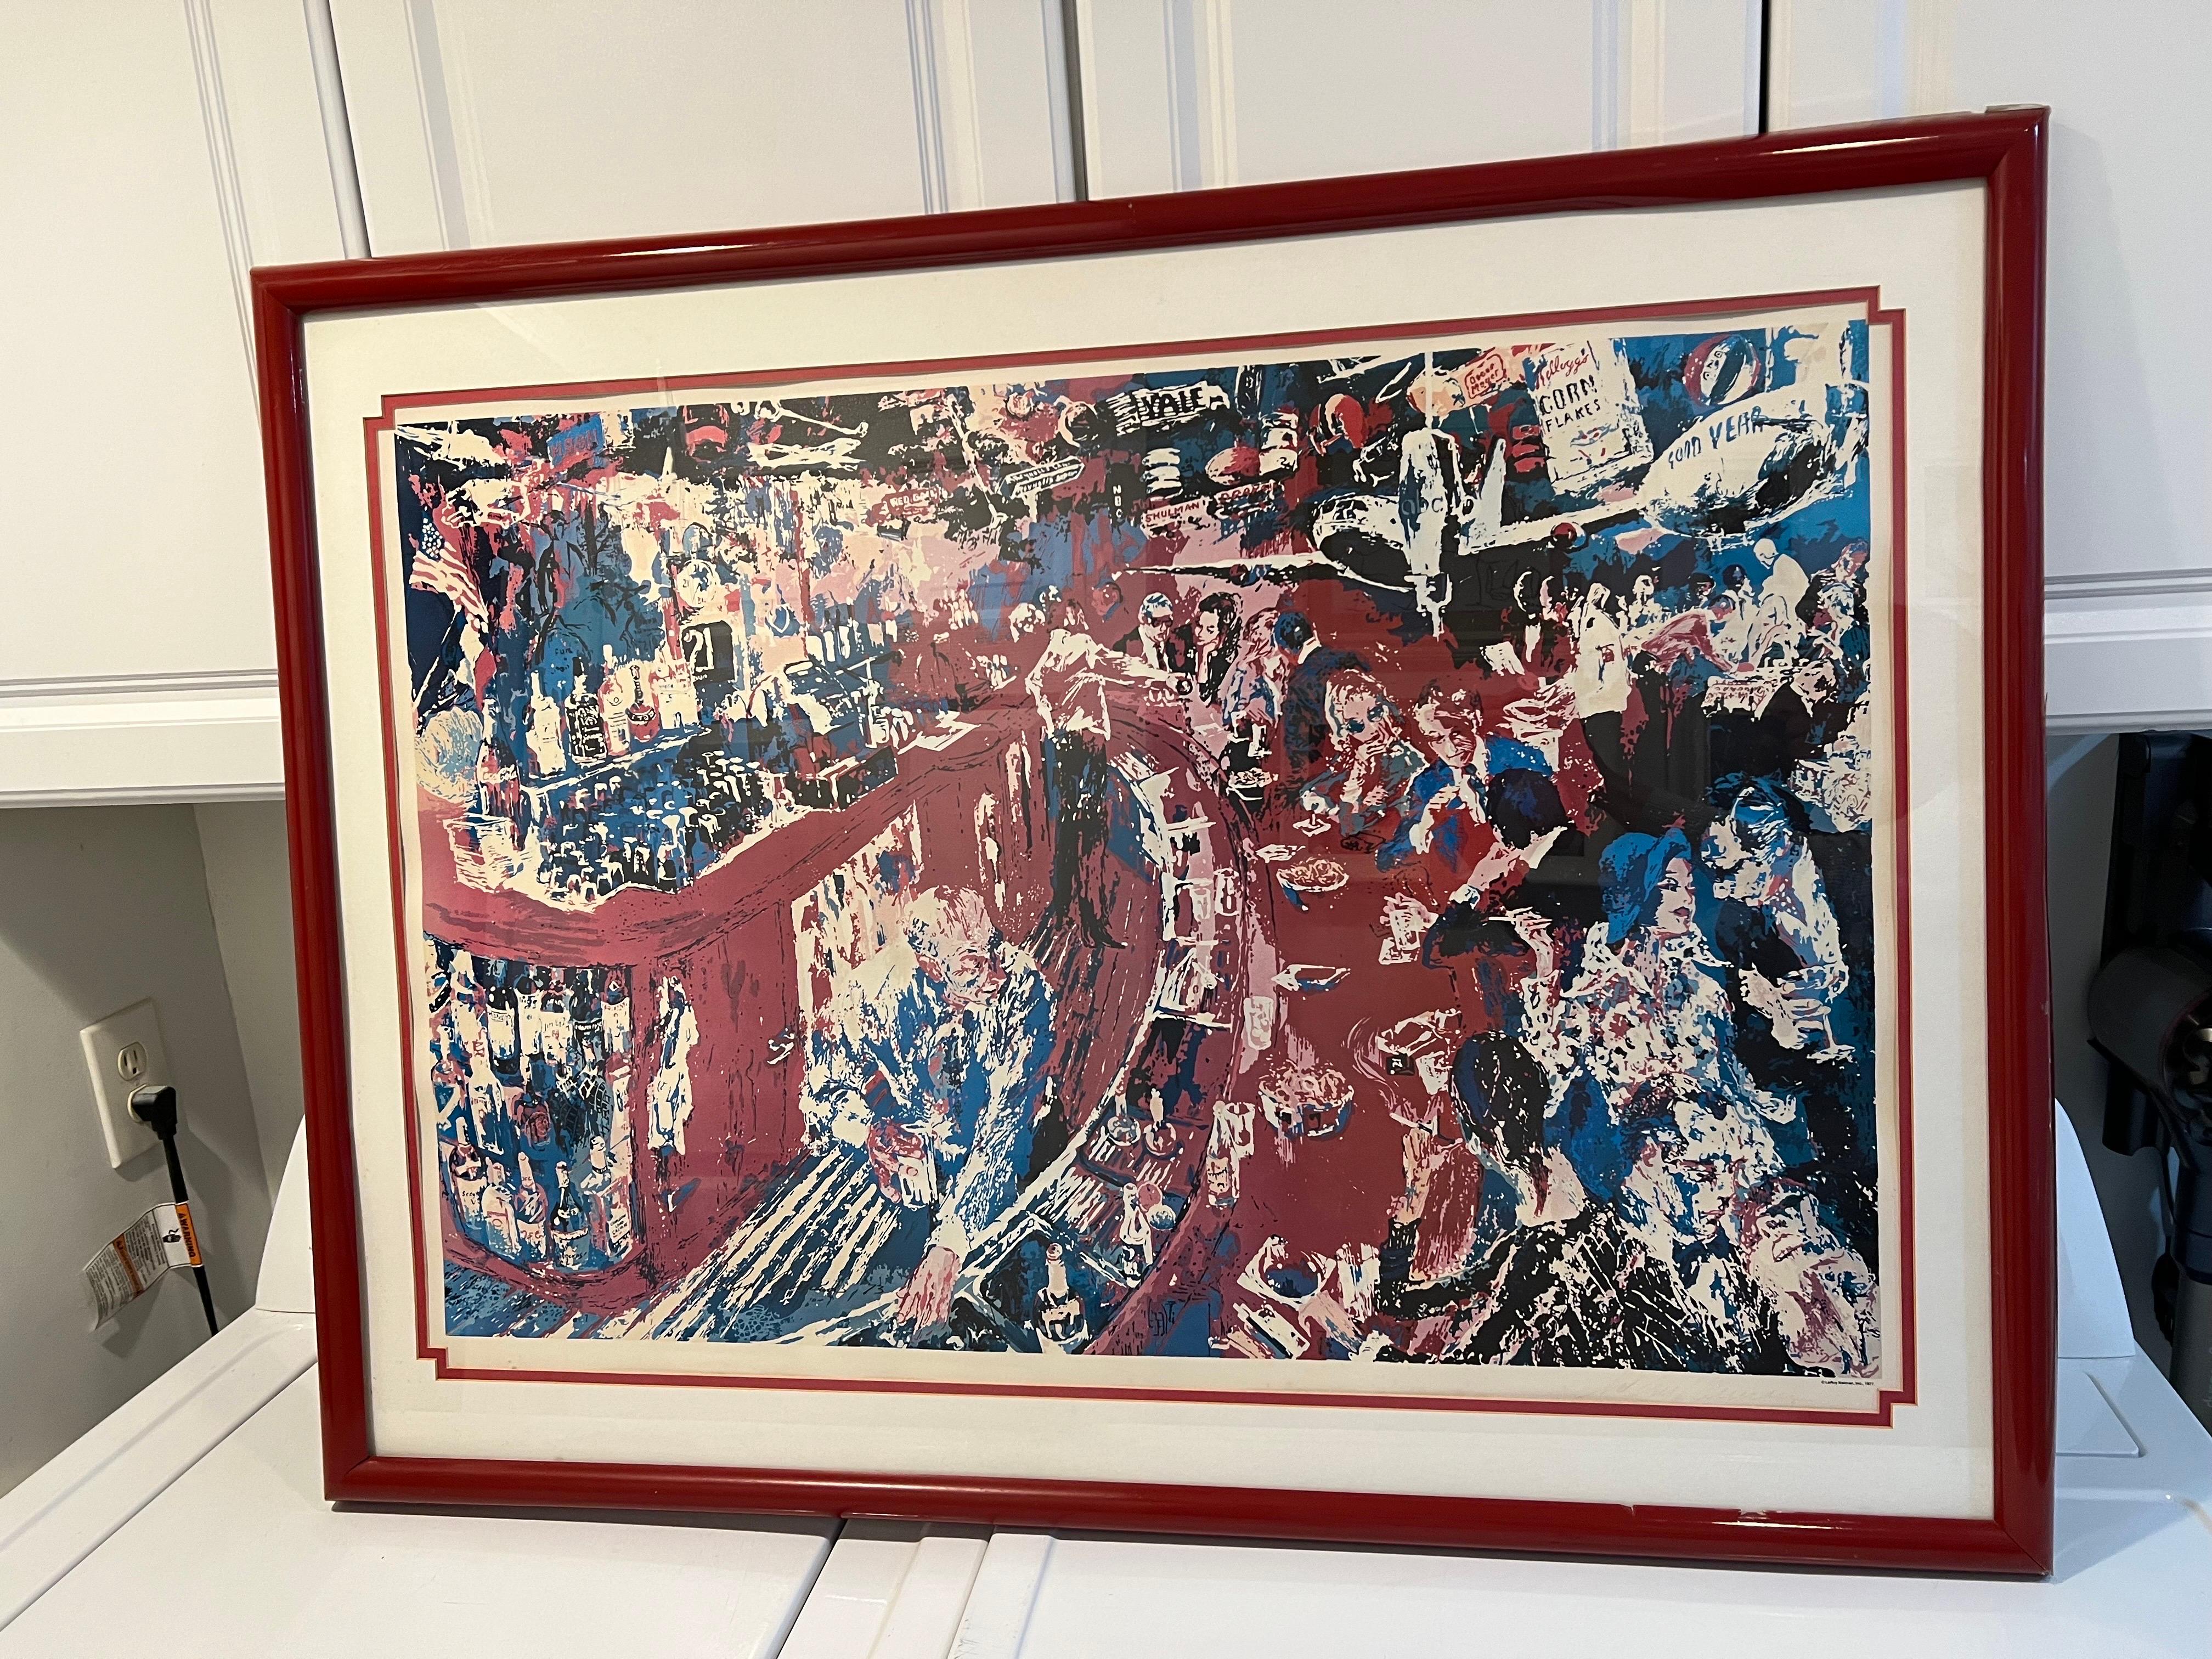 Leroy Neiman 1977 Club 21 Signed Print. Signed lower right but faded. Original 1977 print in custom frame and matting. Red plastic fame and plexiglass overlay. Rare collectible piece of art. 
History of Club 21:
The first version of the club opened